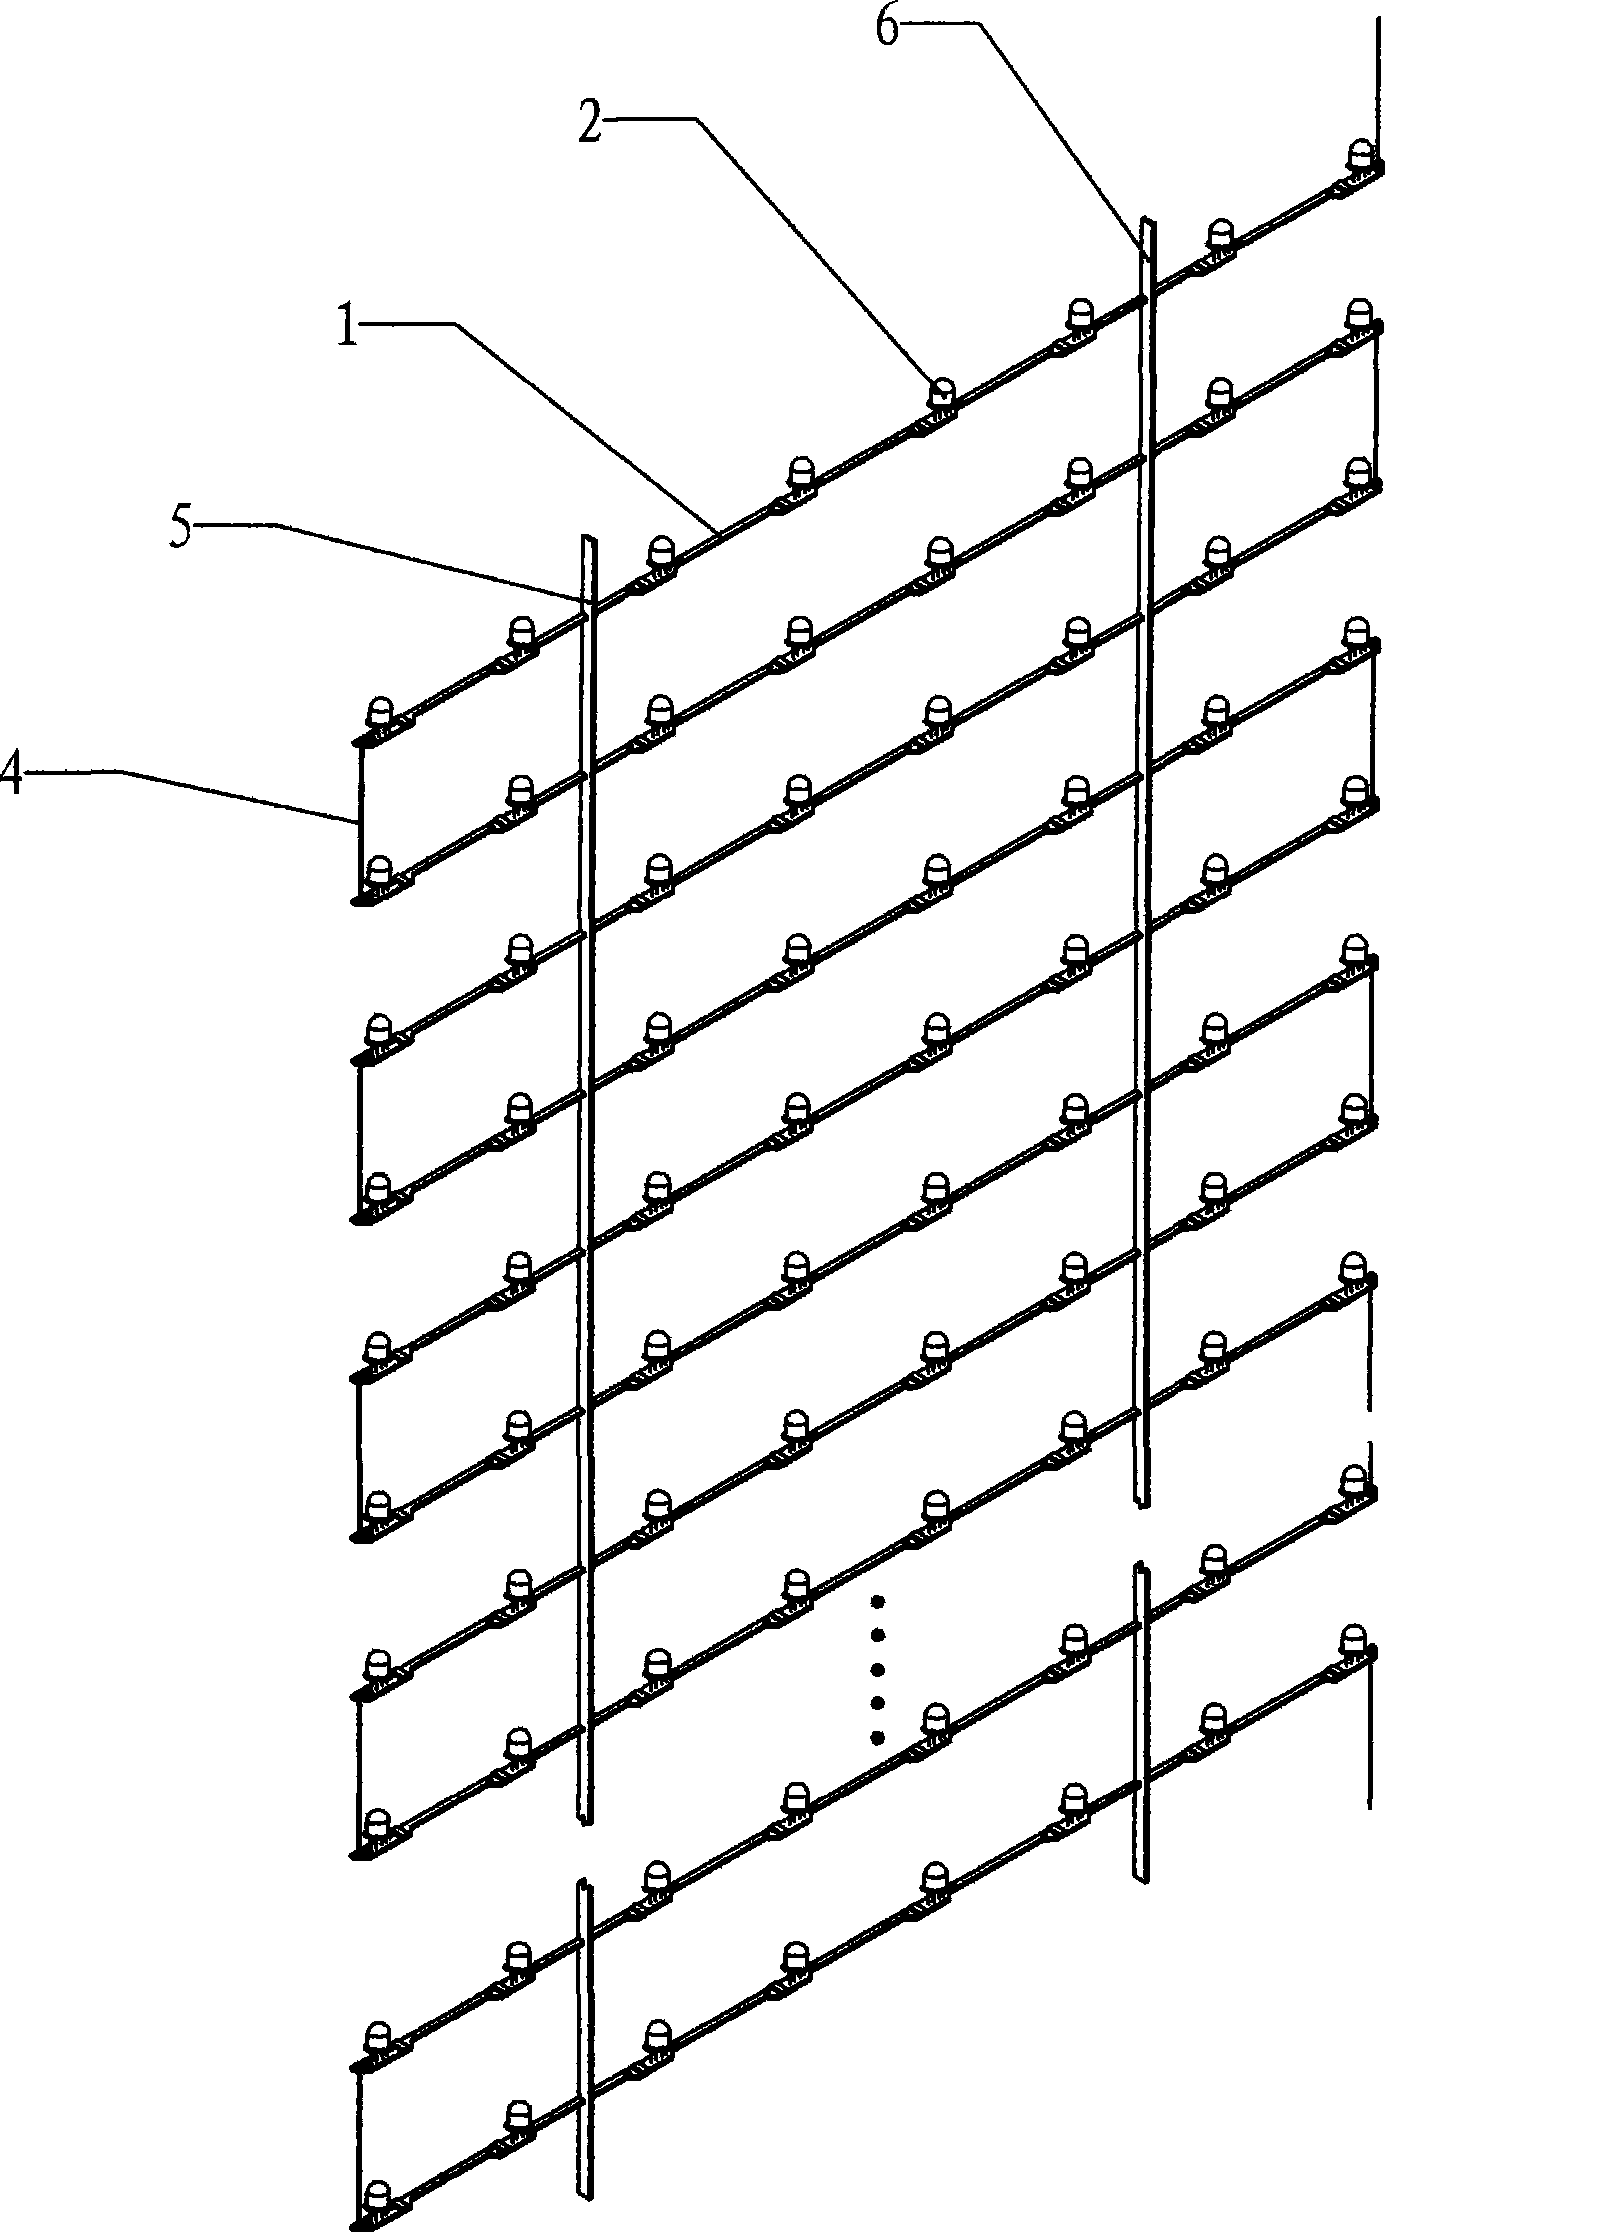 Display array for constructing two-dimension or three-dimension display apparatus